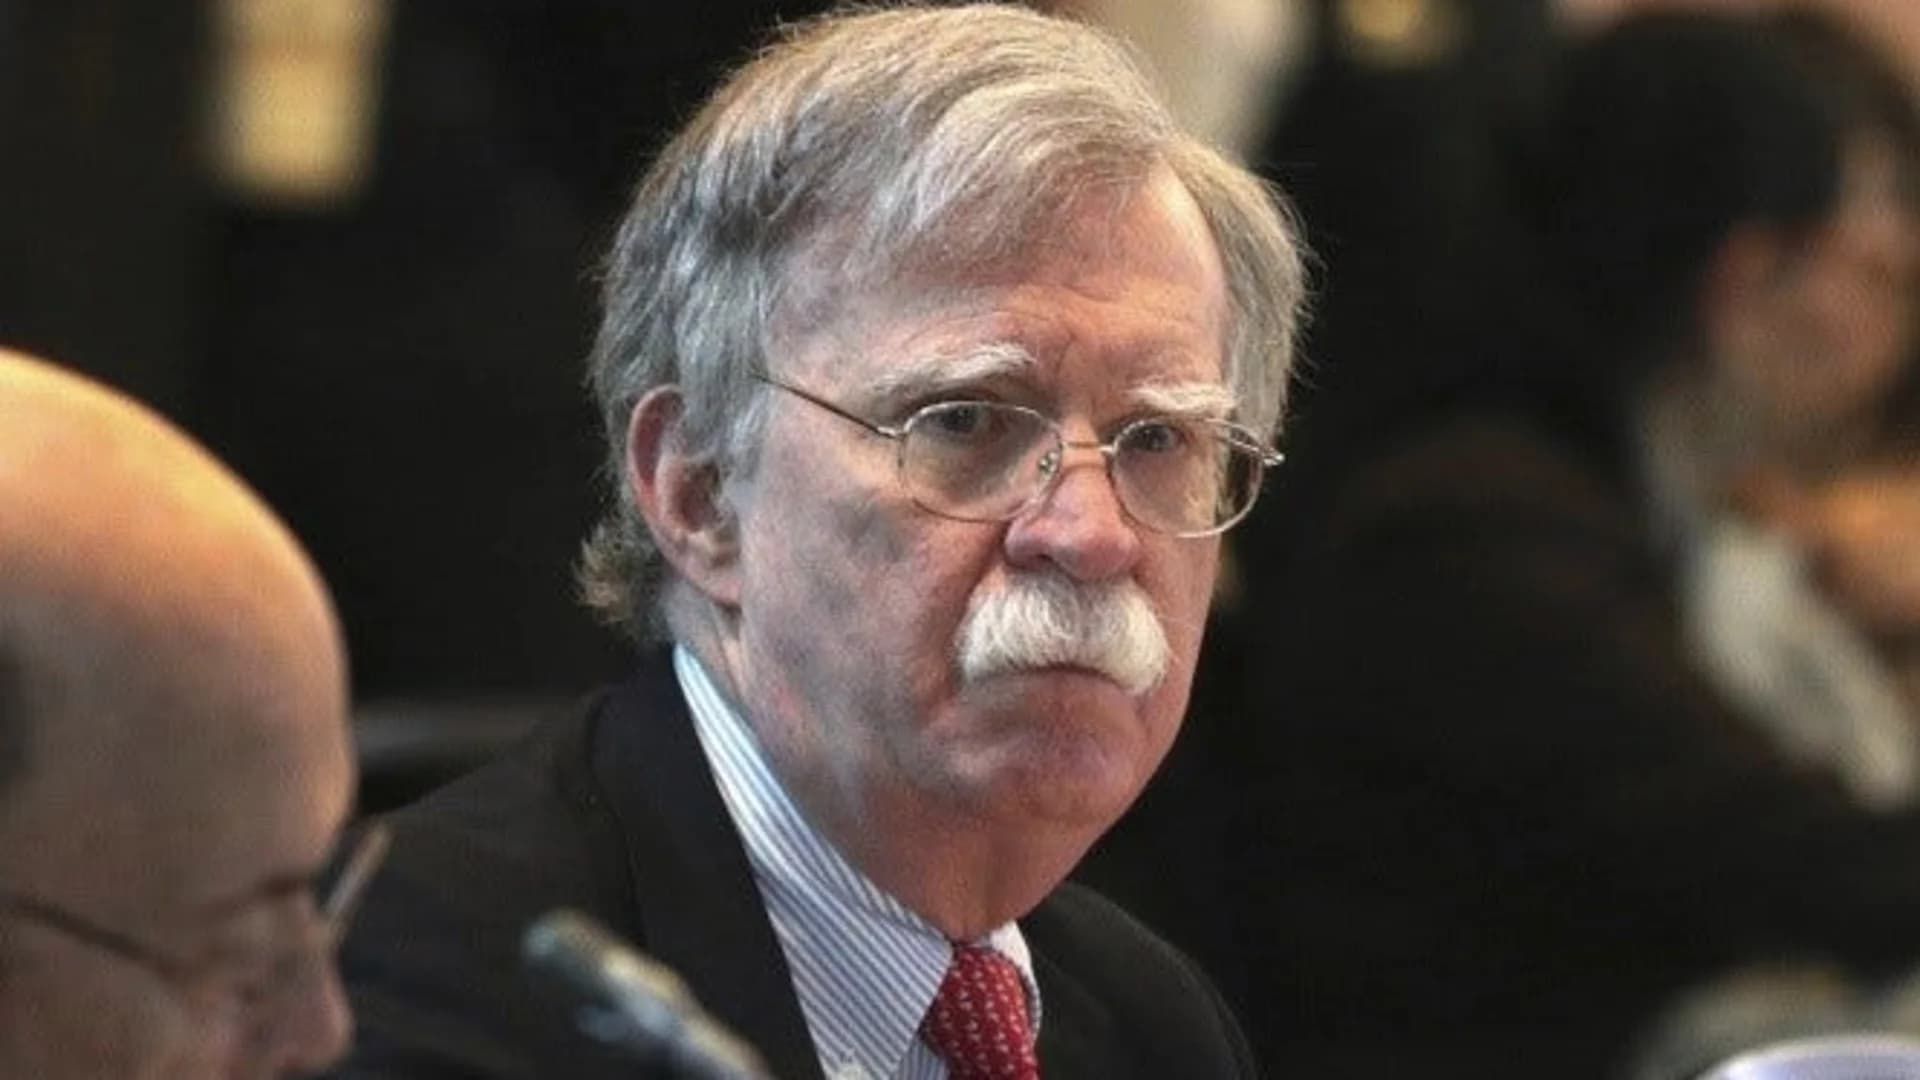 Trump dismisses John Bolton, says they 'disagreed strongly'